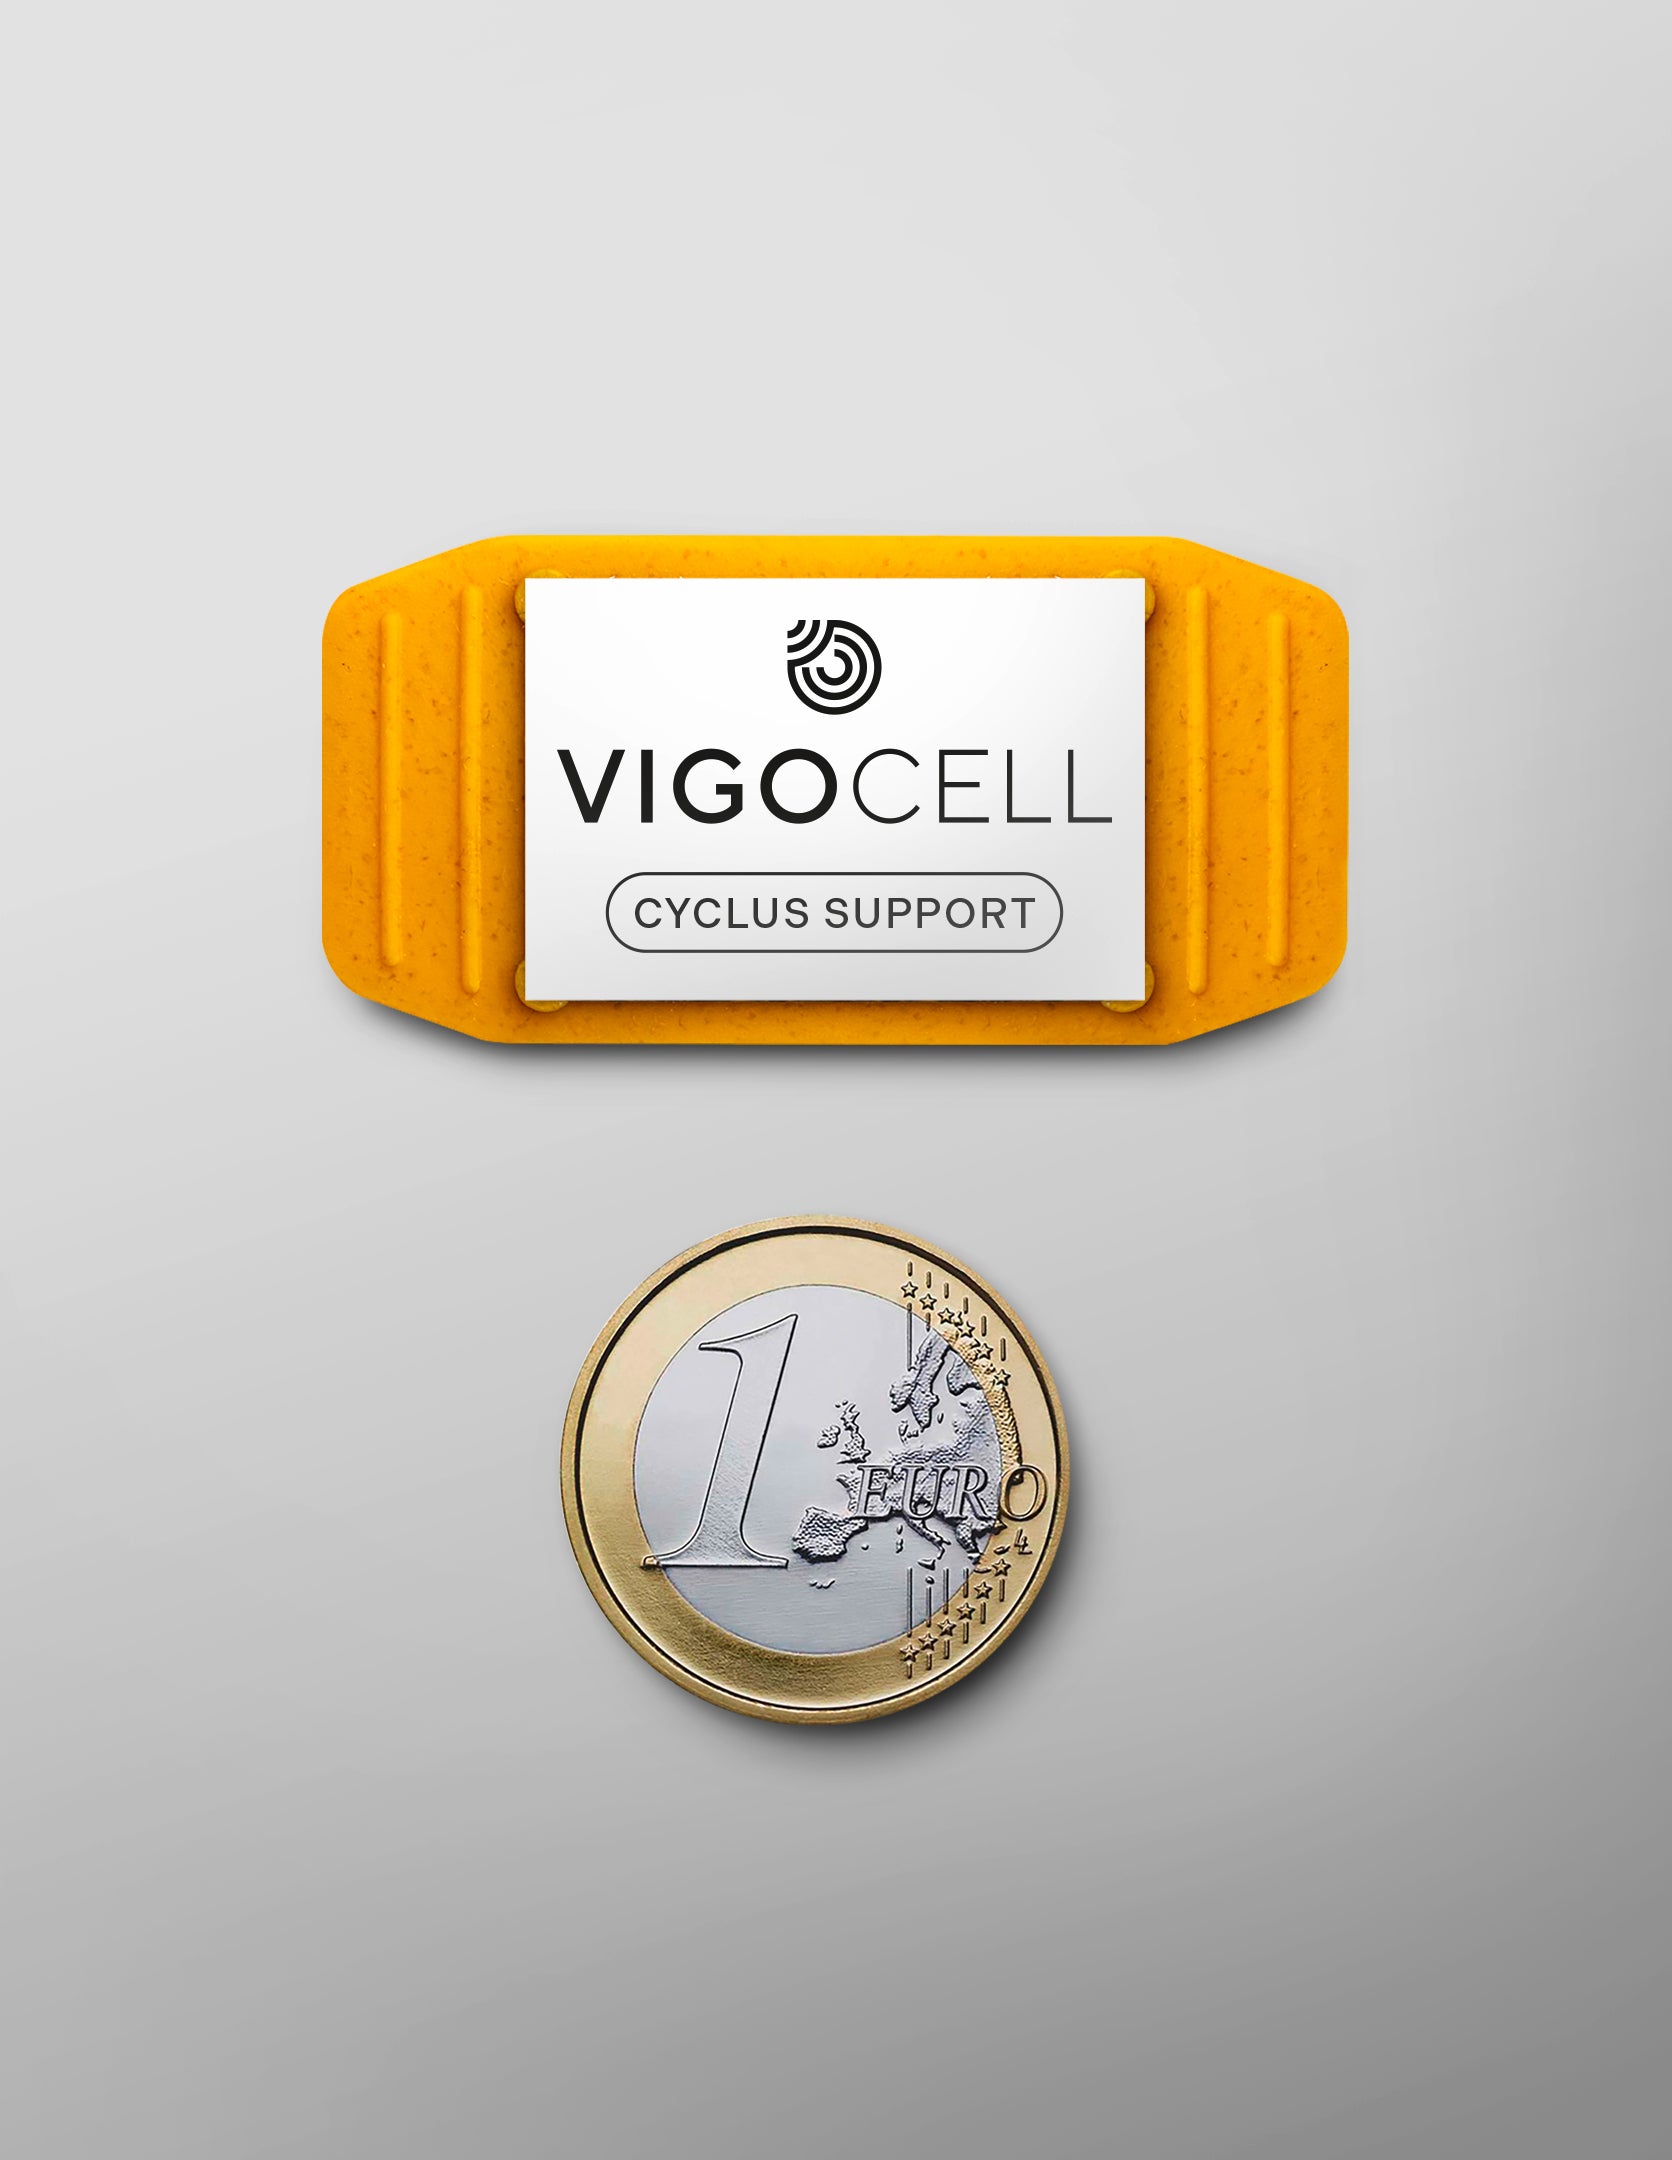 VigoCell Cyclus Support frequentiechip